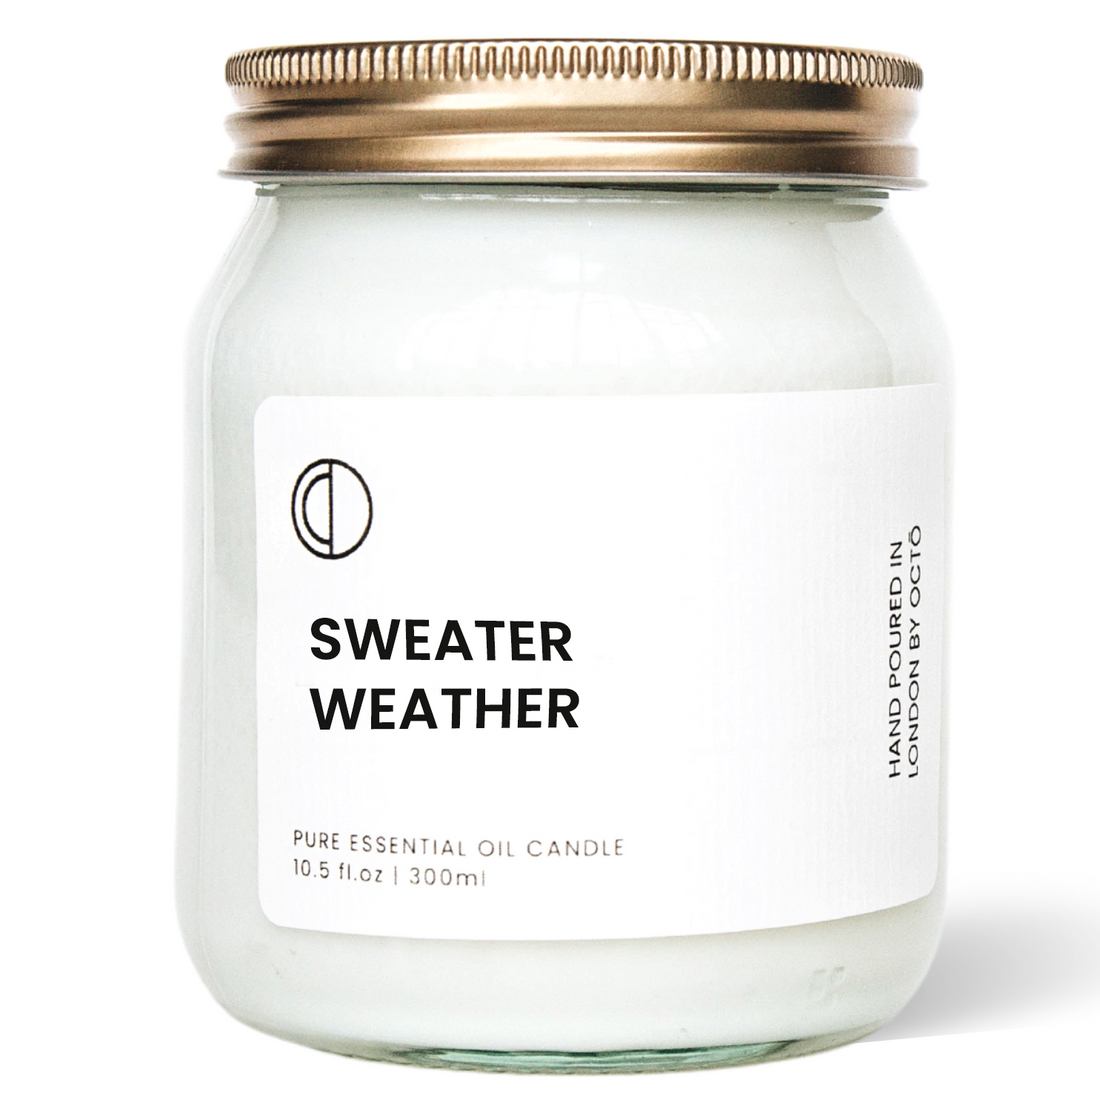 Sweater Weather (Pine + Clove) 300ml candle